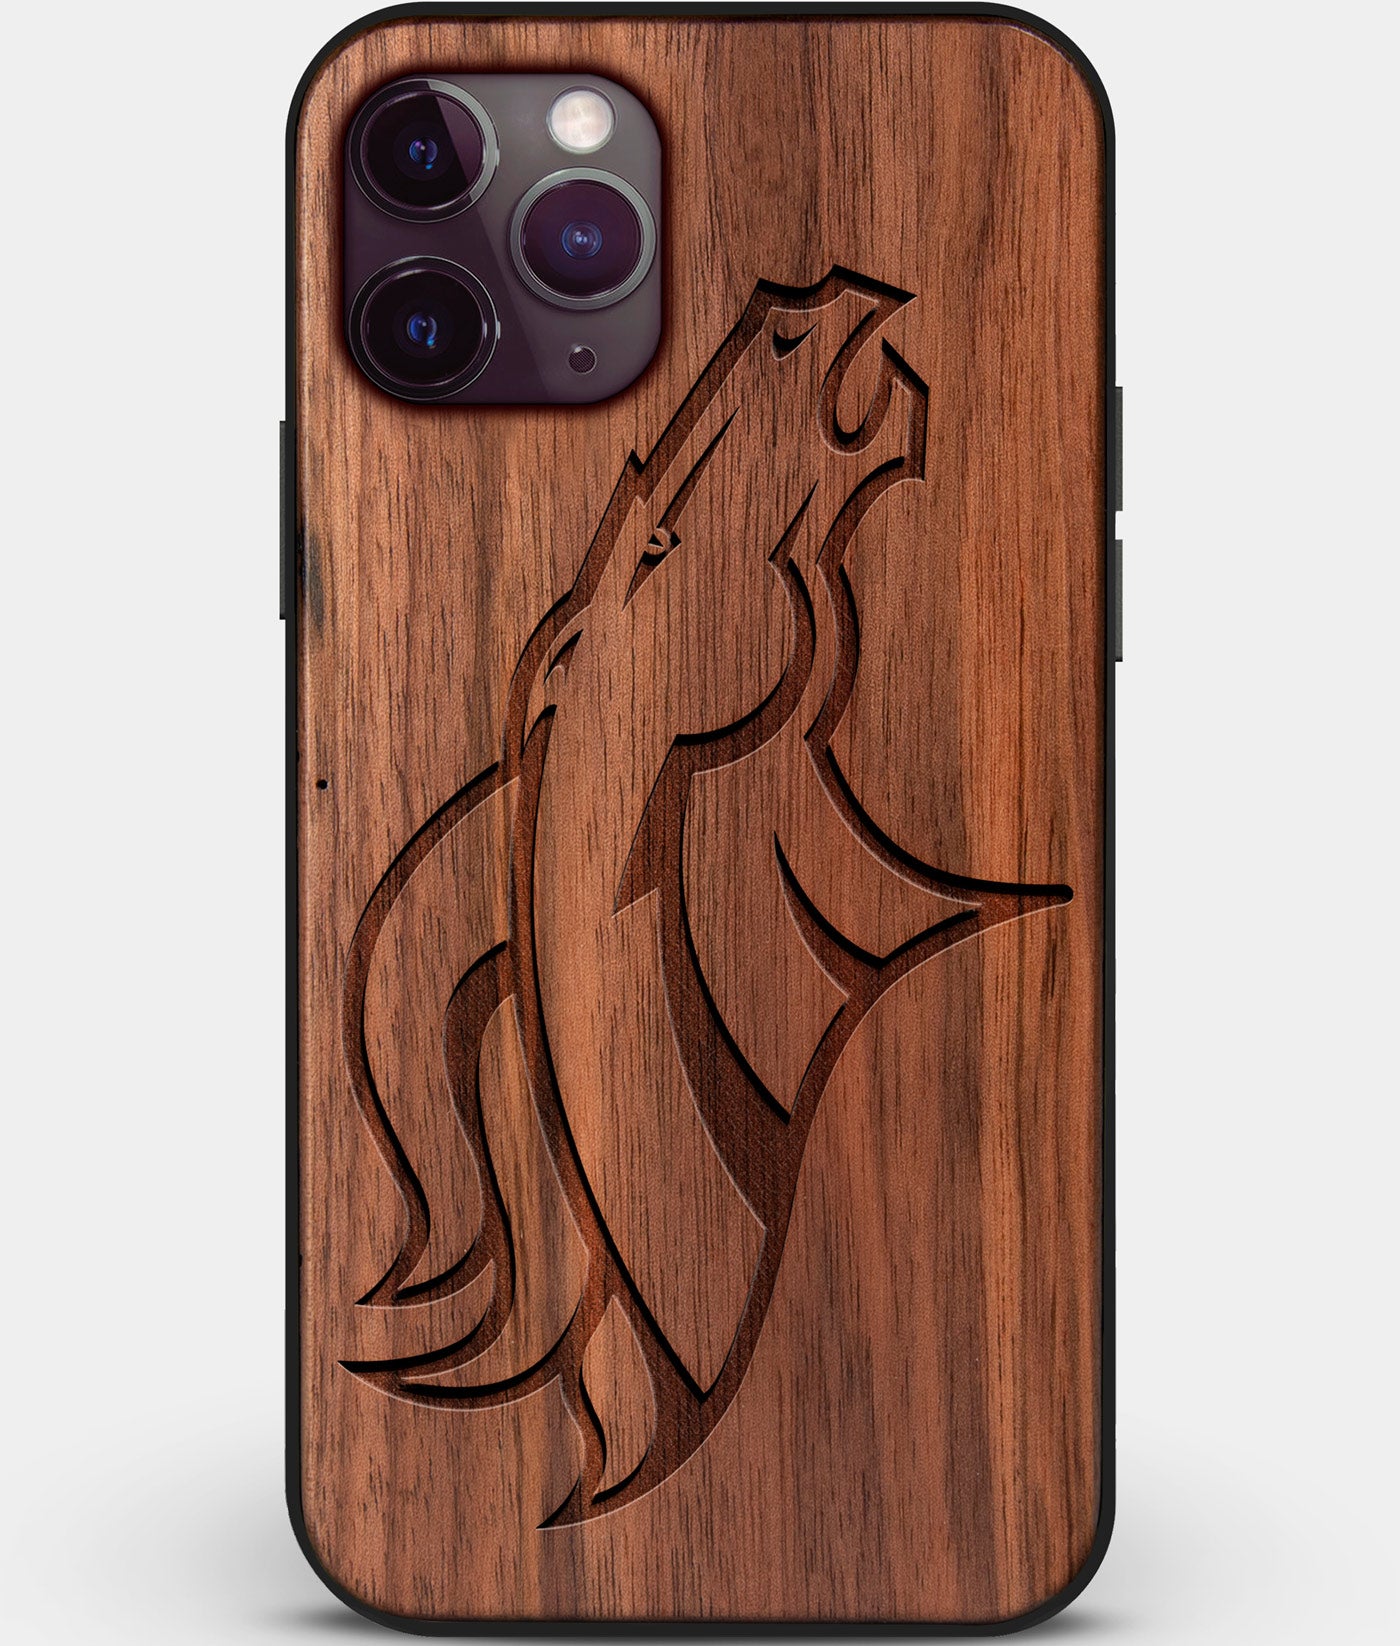 Custom Carved Wood Denver Broncos iPhone 11 Pro Case | Personalized Walnut Wood Denver Broncos Cover, Birthday Gift, Gifts For Him, Monogrammed Gift For Fan | by Engraved In Nature